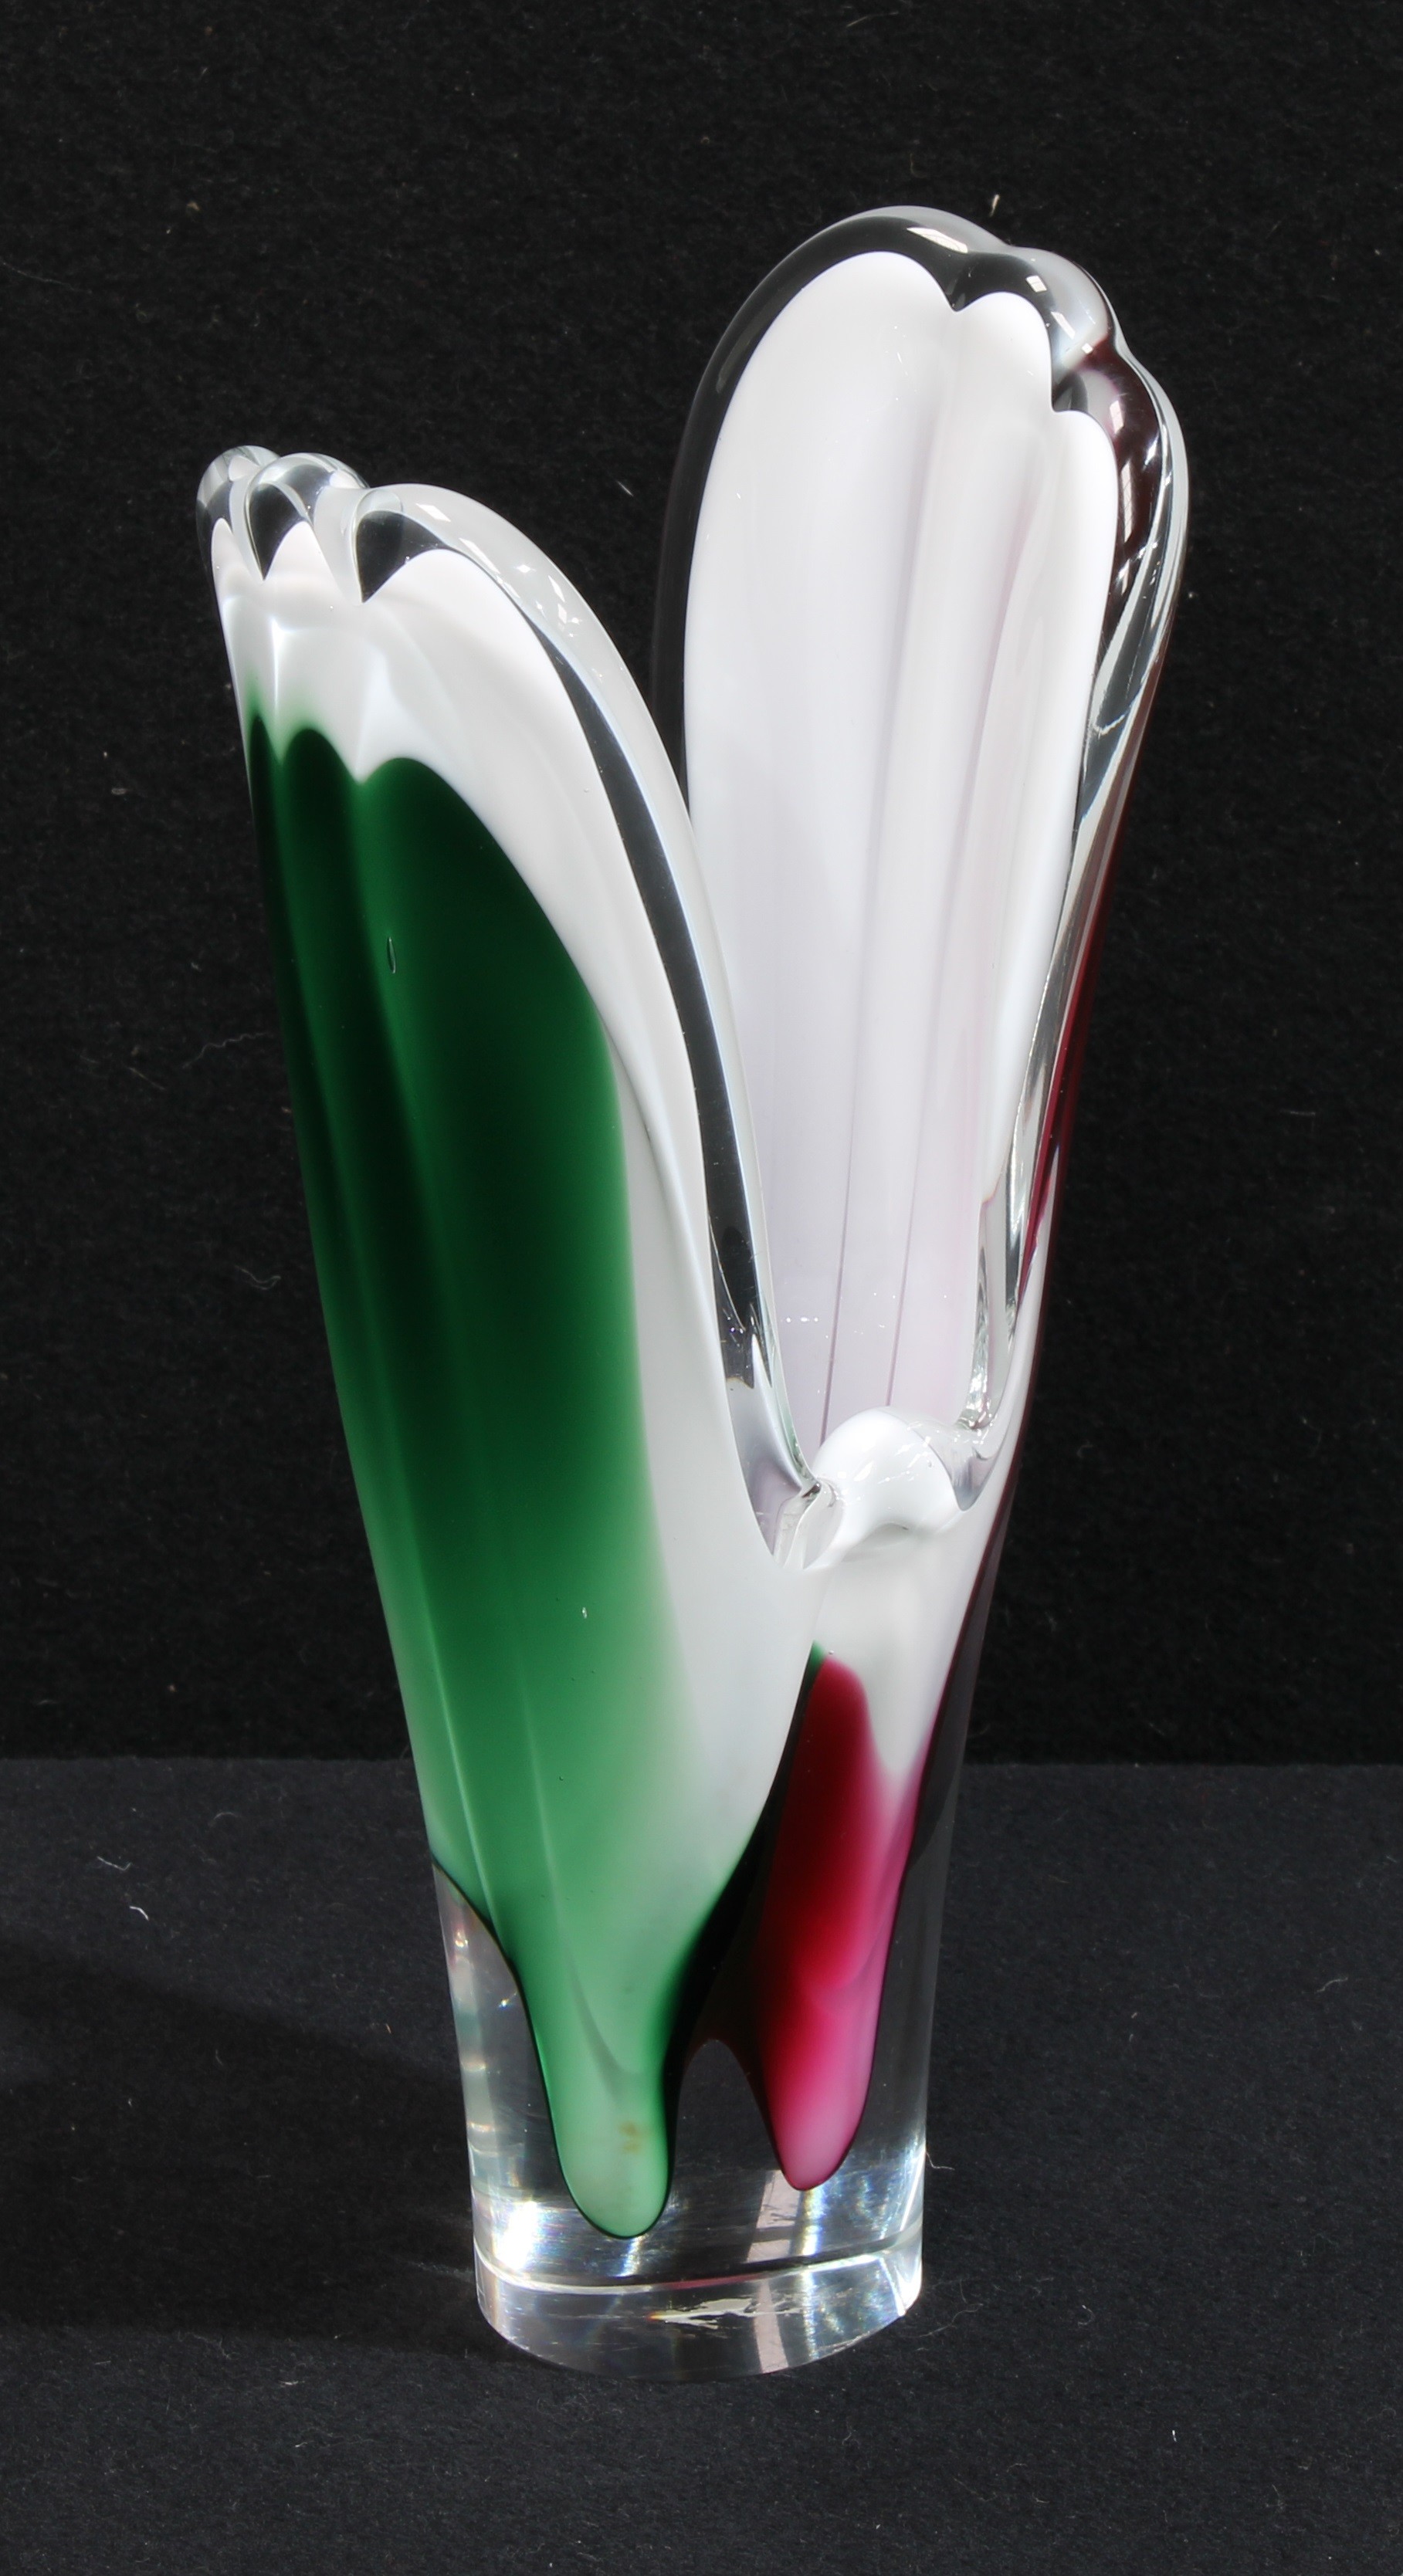 A Flygsfors Coquille art glass vase, 26cm high, mid-20th century